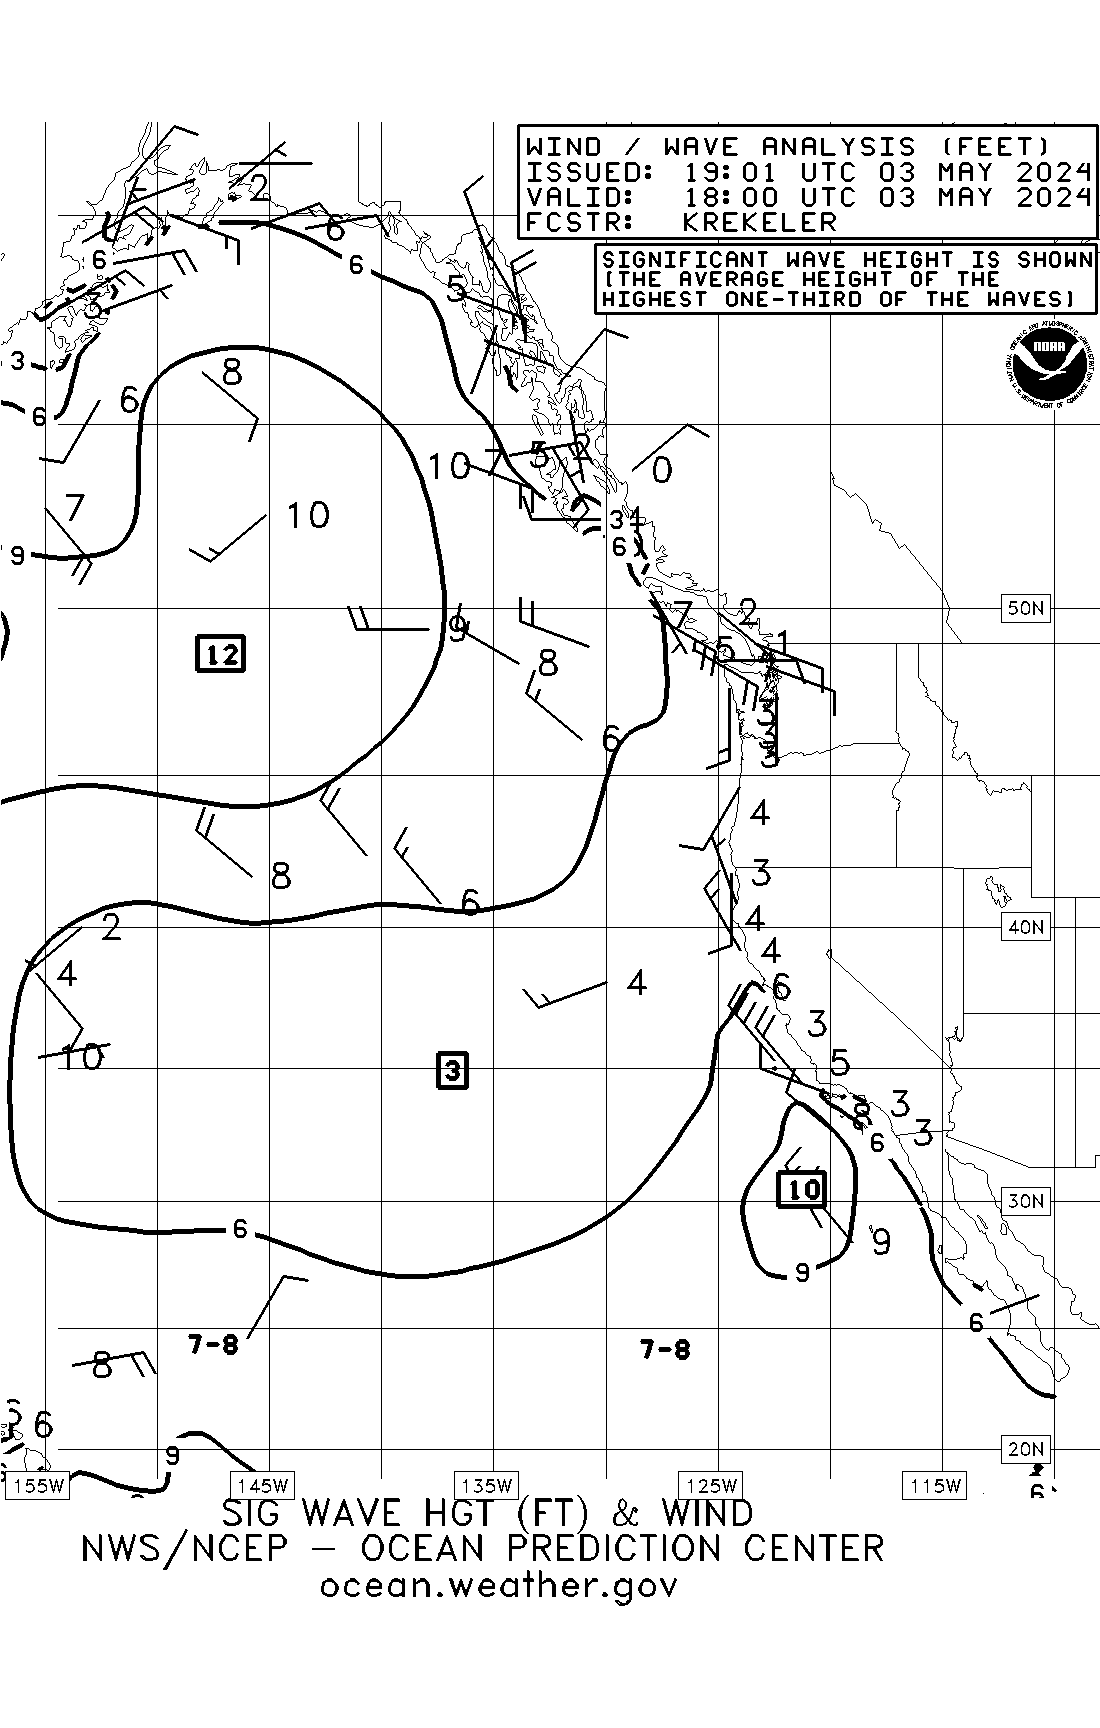 Image of Pacific Regional Sea State, every 6 hours